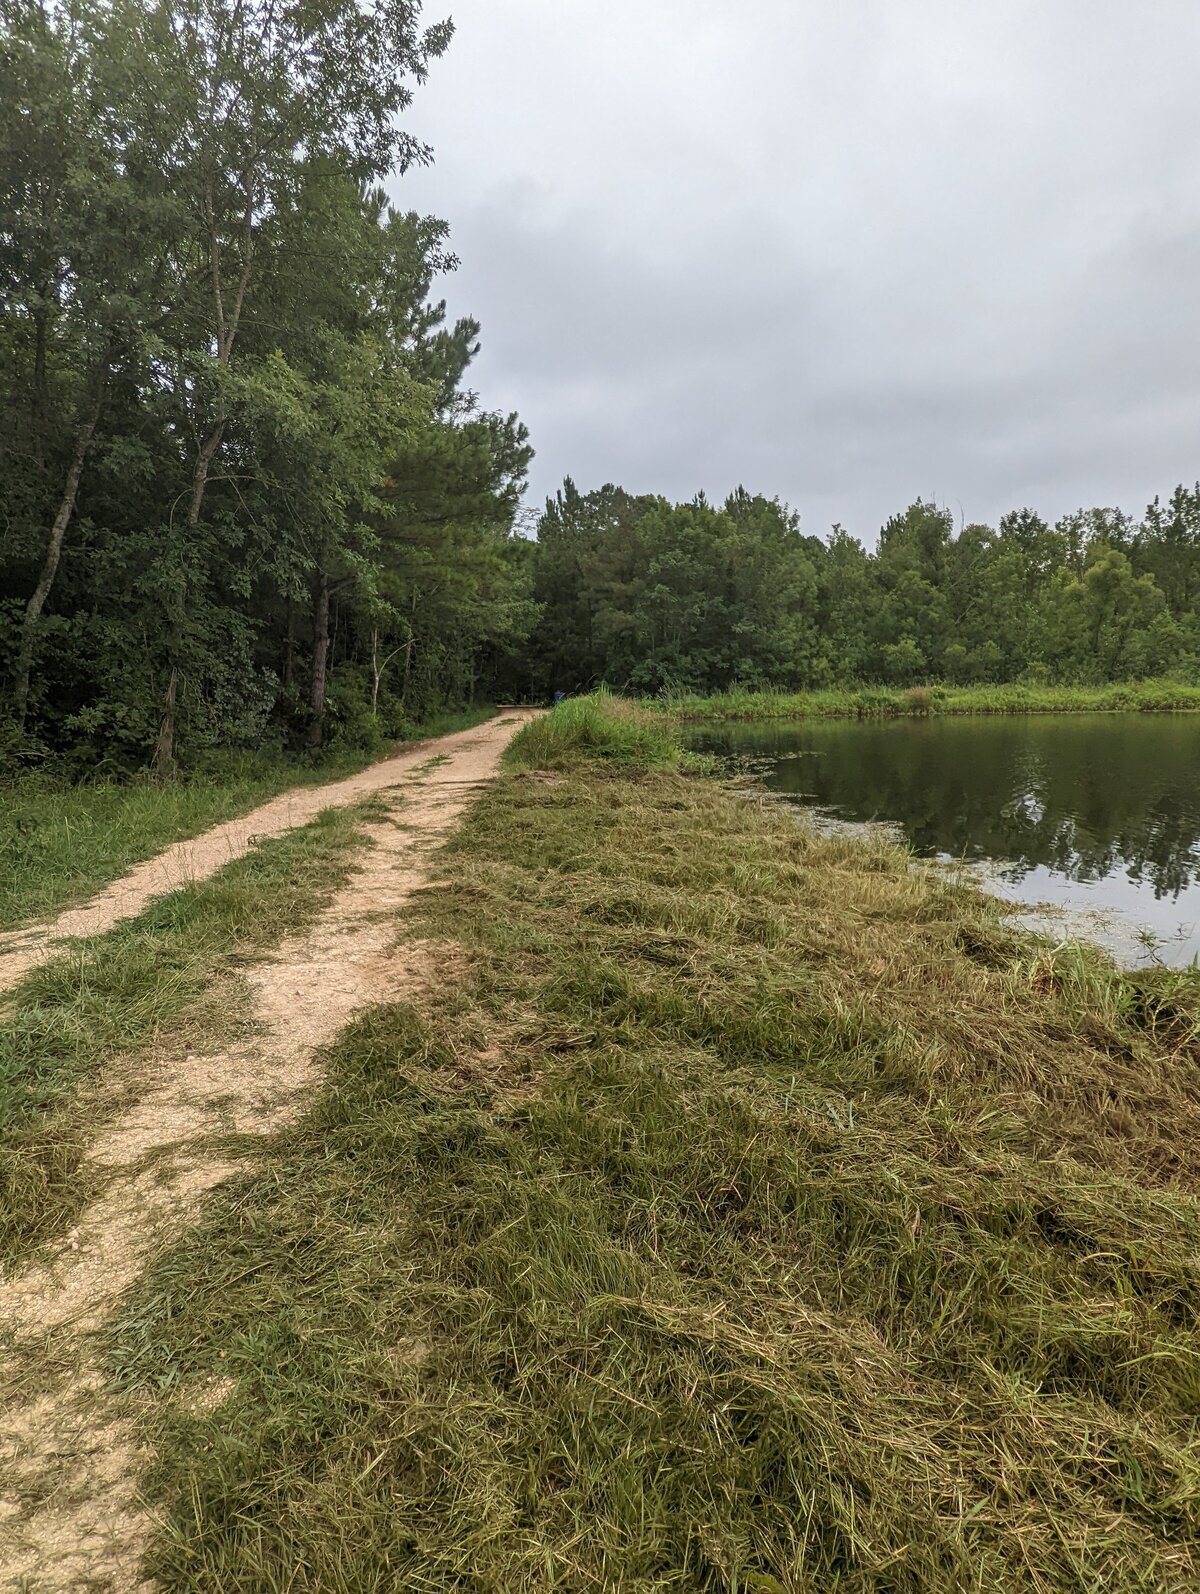 dirt-path-between-pond-and-treeline-on-a-cloudy-day